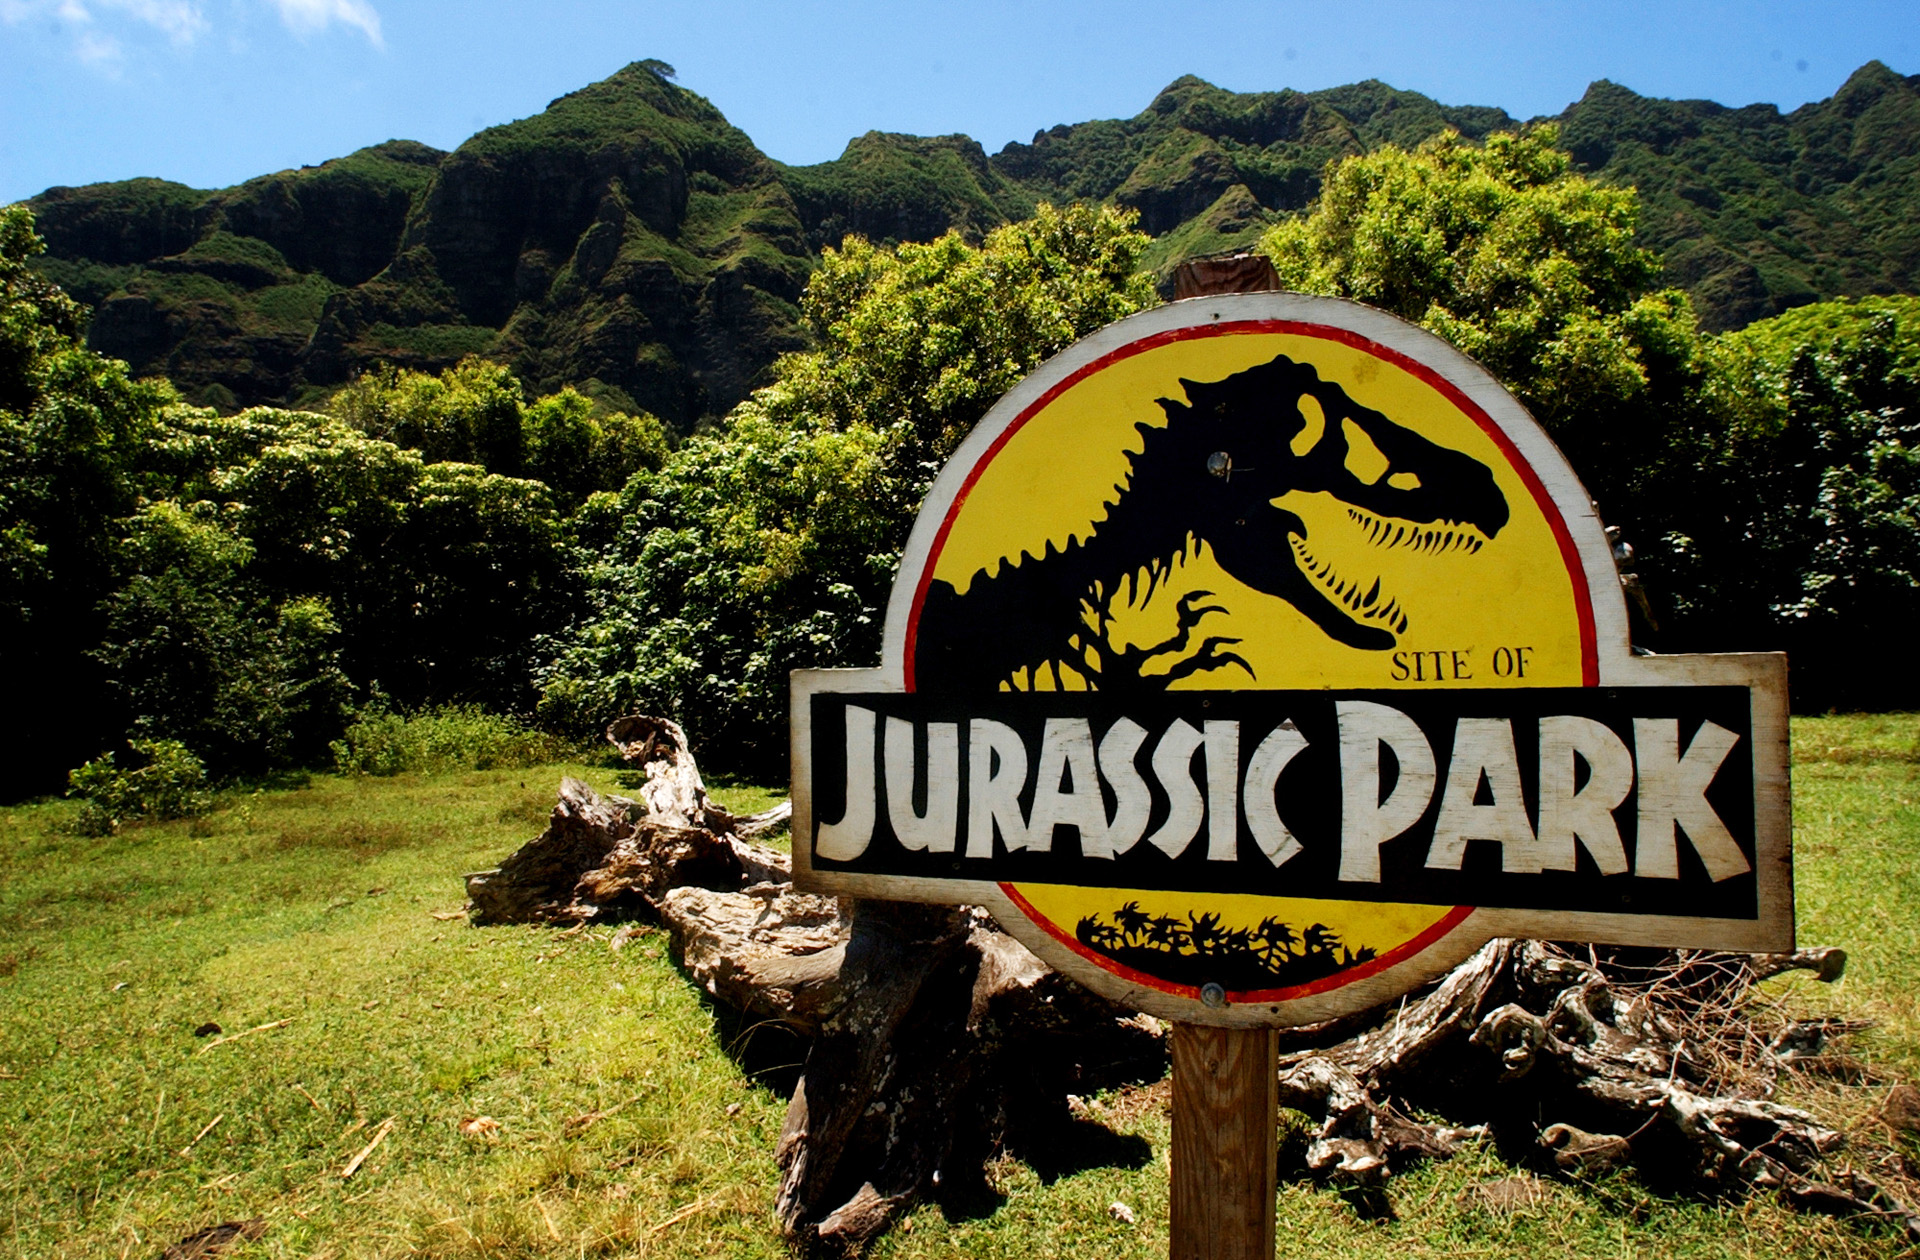 'Jurassic Park' roaring back to theaters for 30th anniversary run